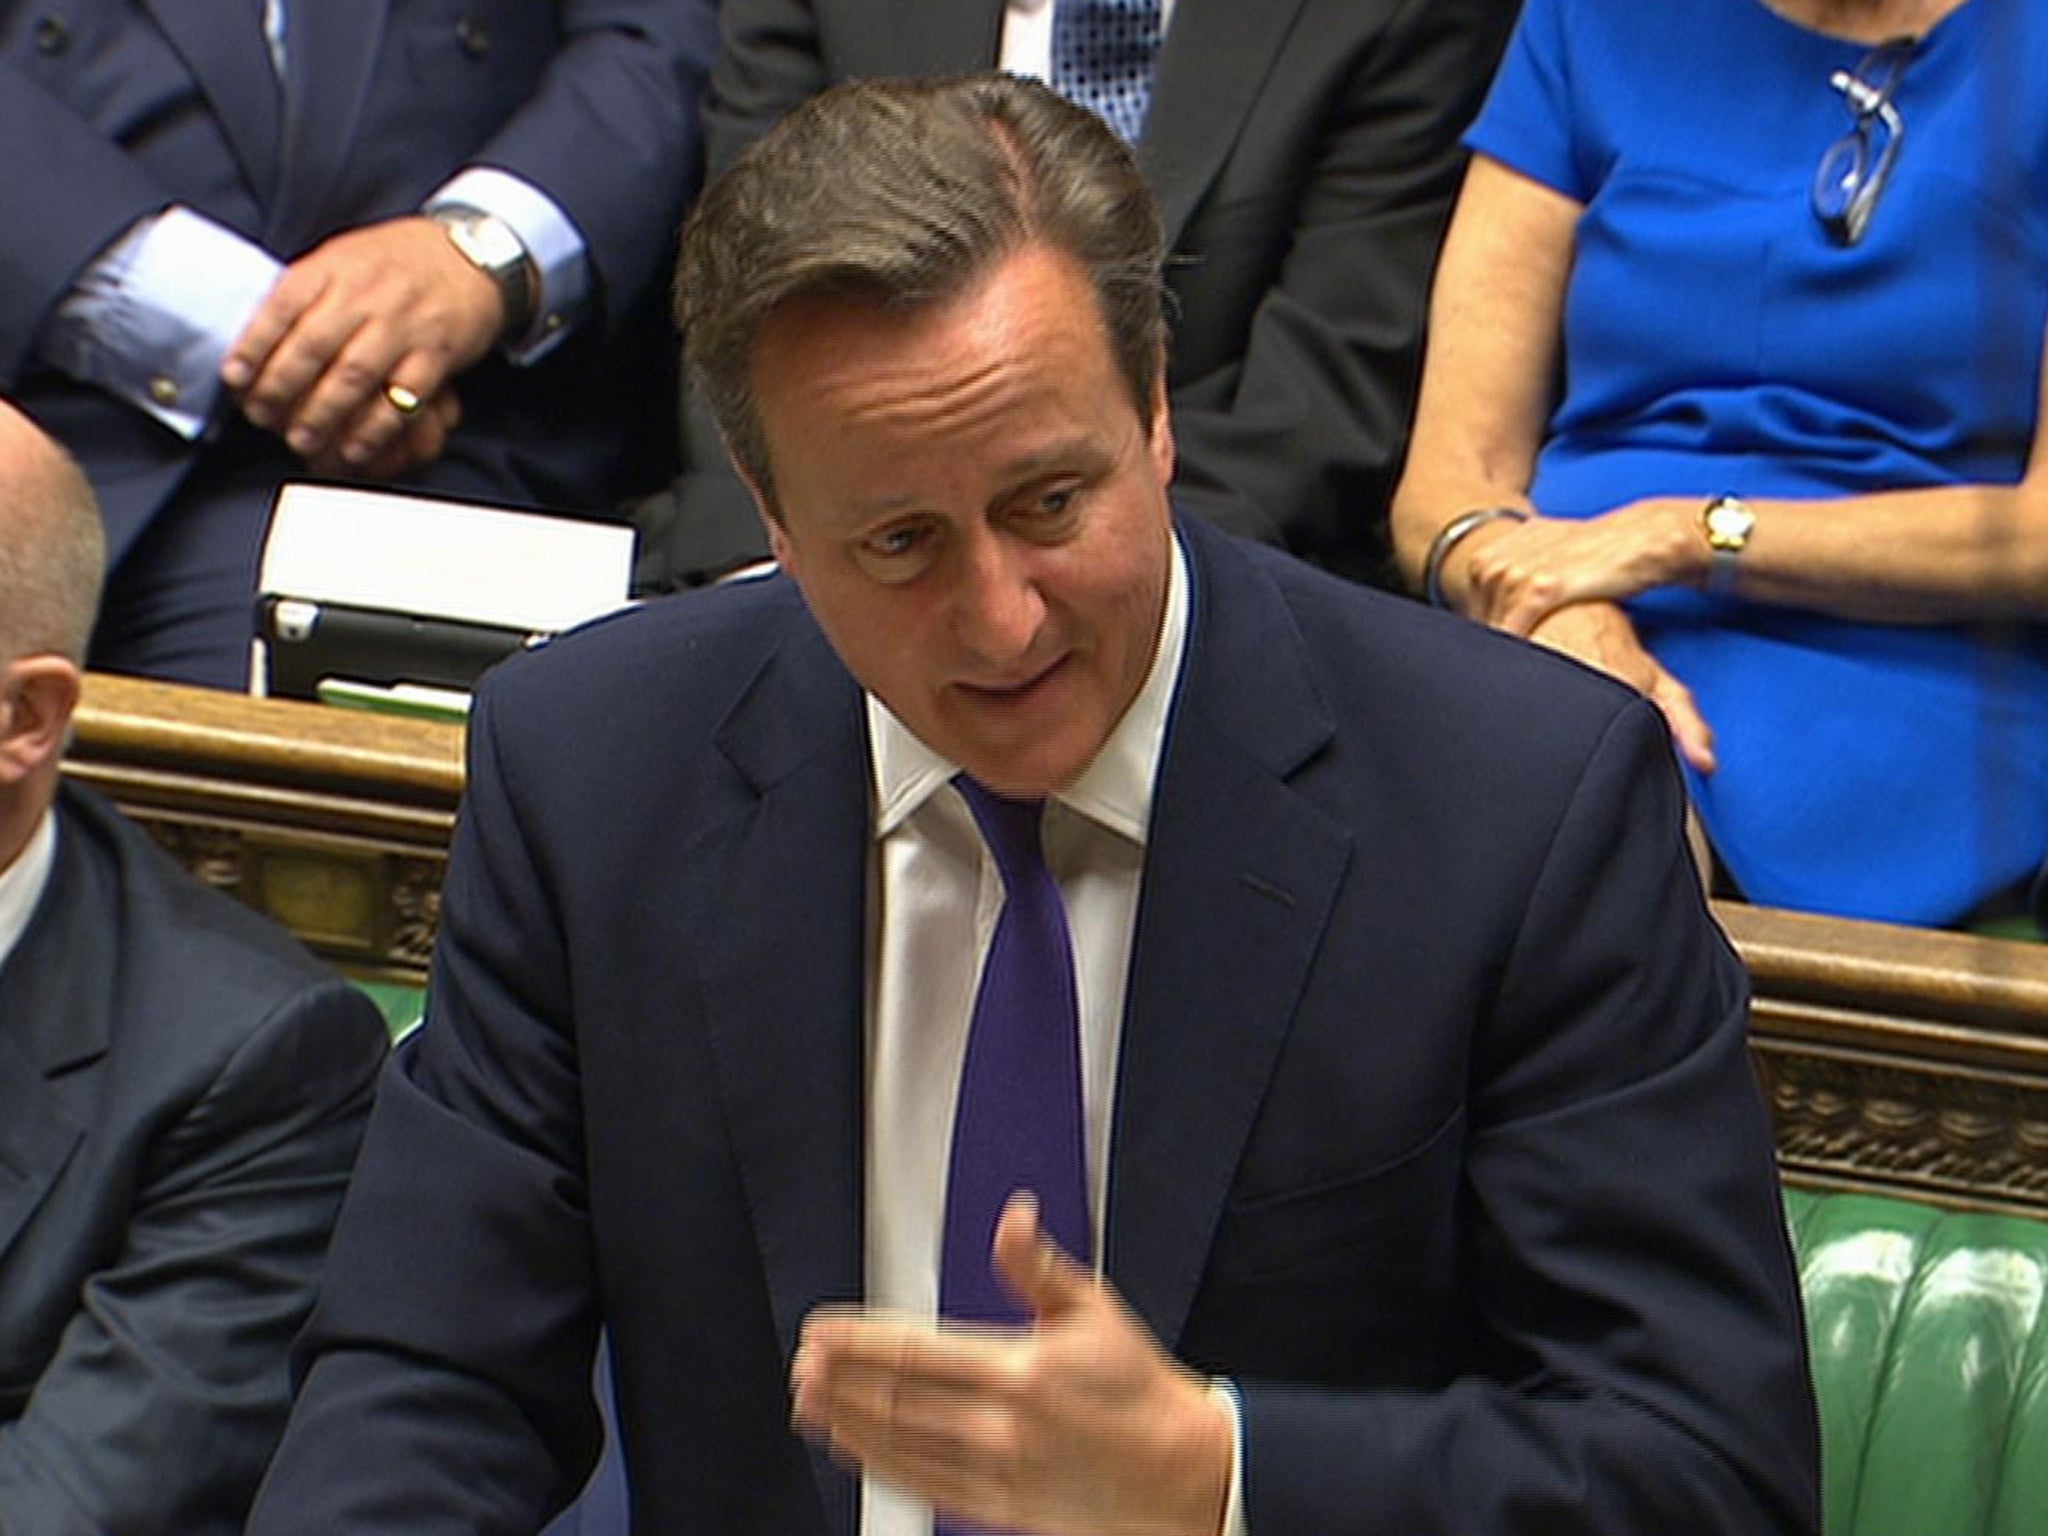 David Cameron’s decision to approve air strikes against Isis is dividing opinion